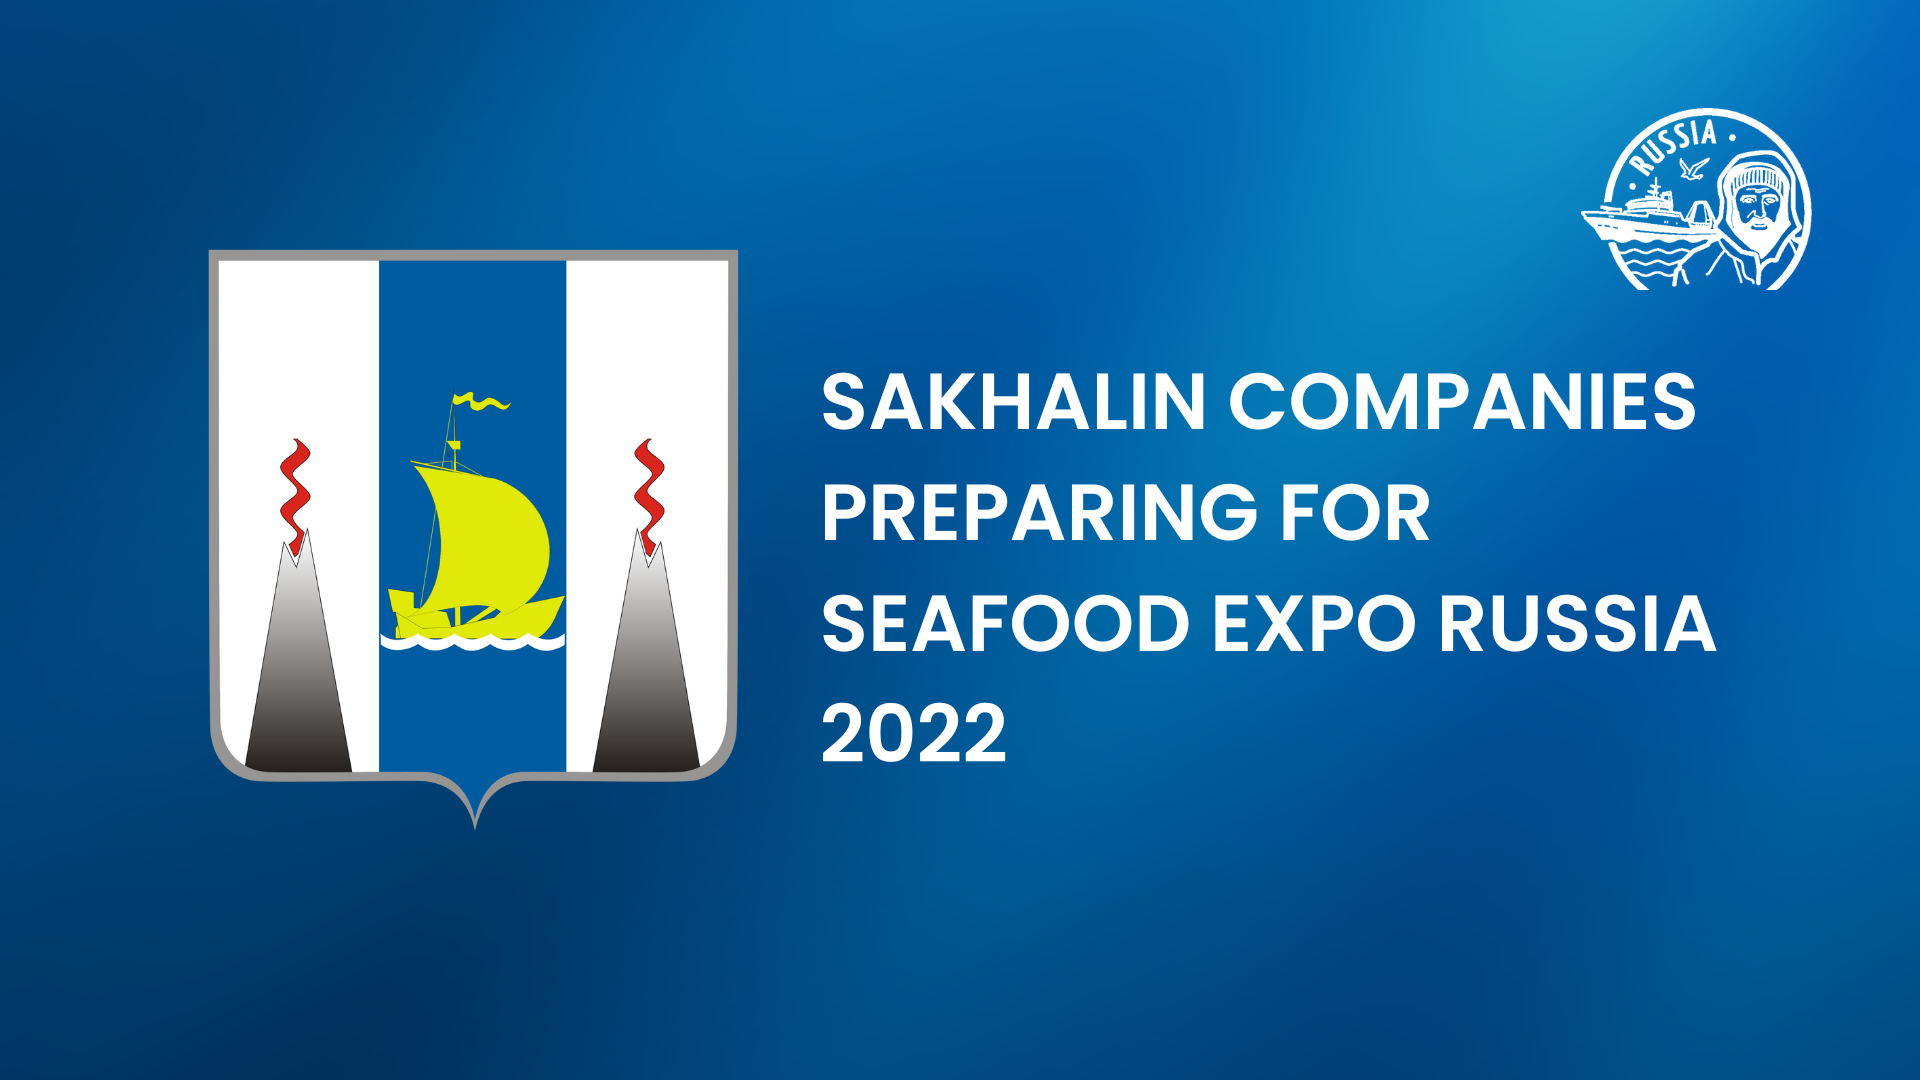 Sakhalin Companies Preparing for Seafood Expo Russia 2022